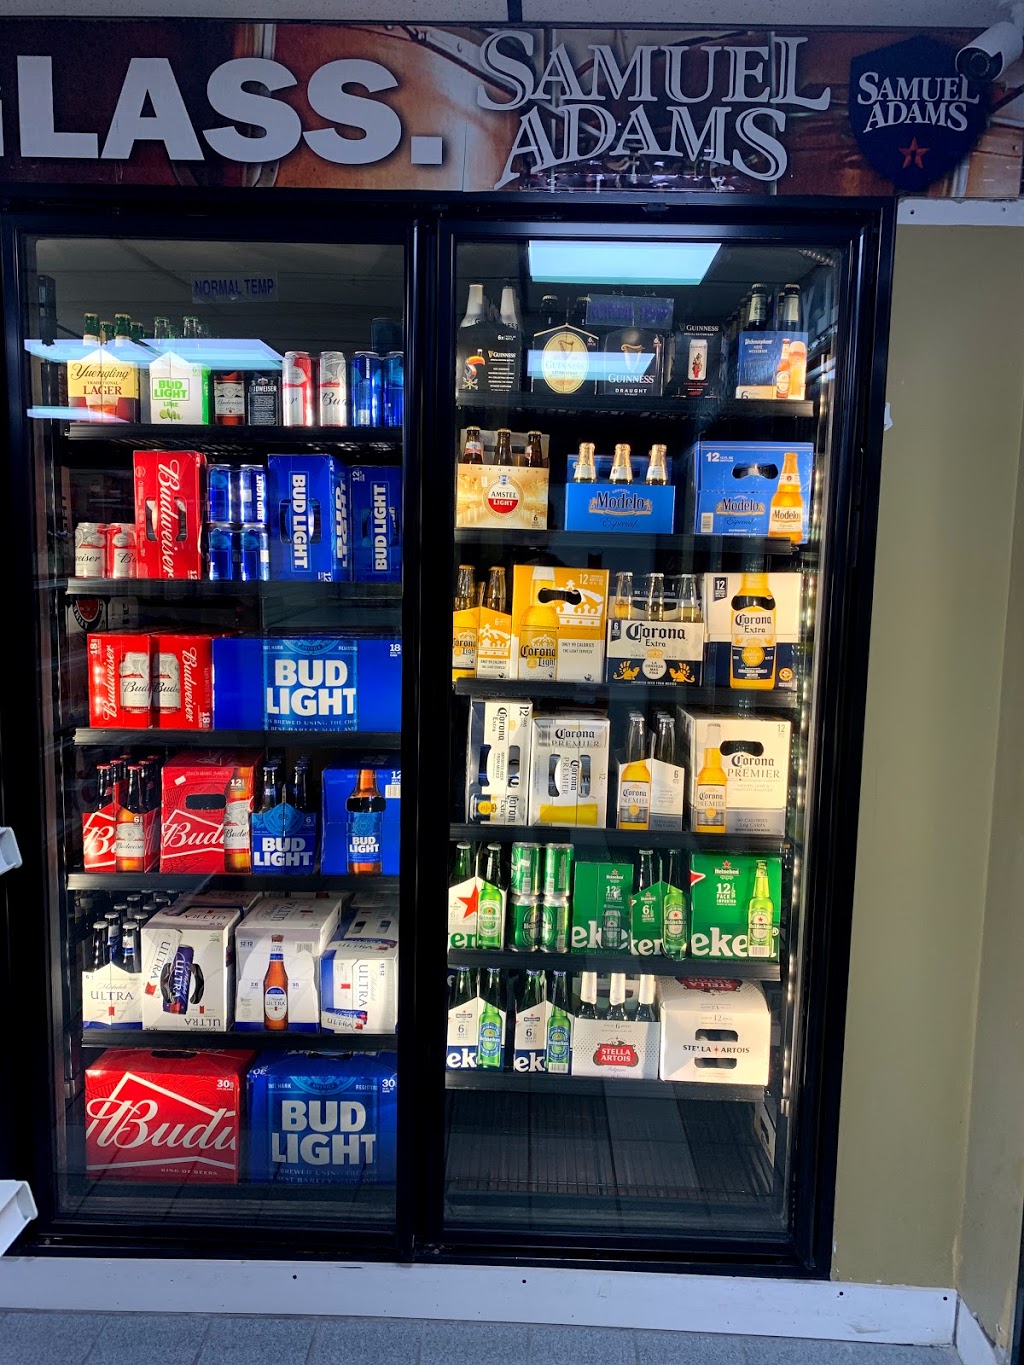 Richdale Convenience Store | 29 Smith St, Marblehead, MA 01945, USA | Phone: (781) 631-4869